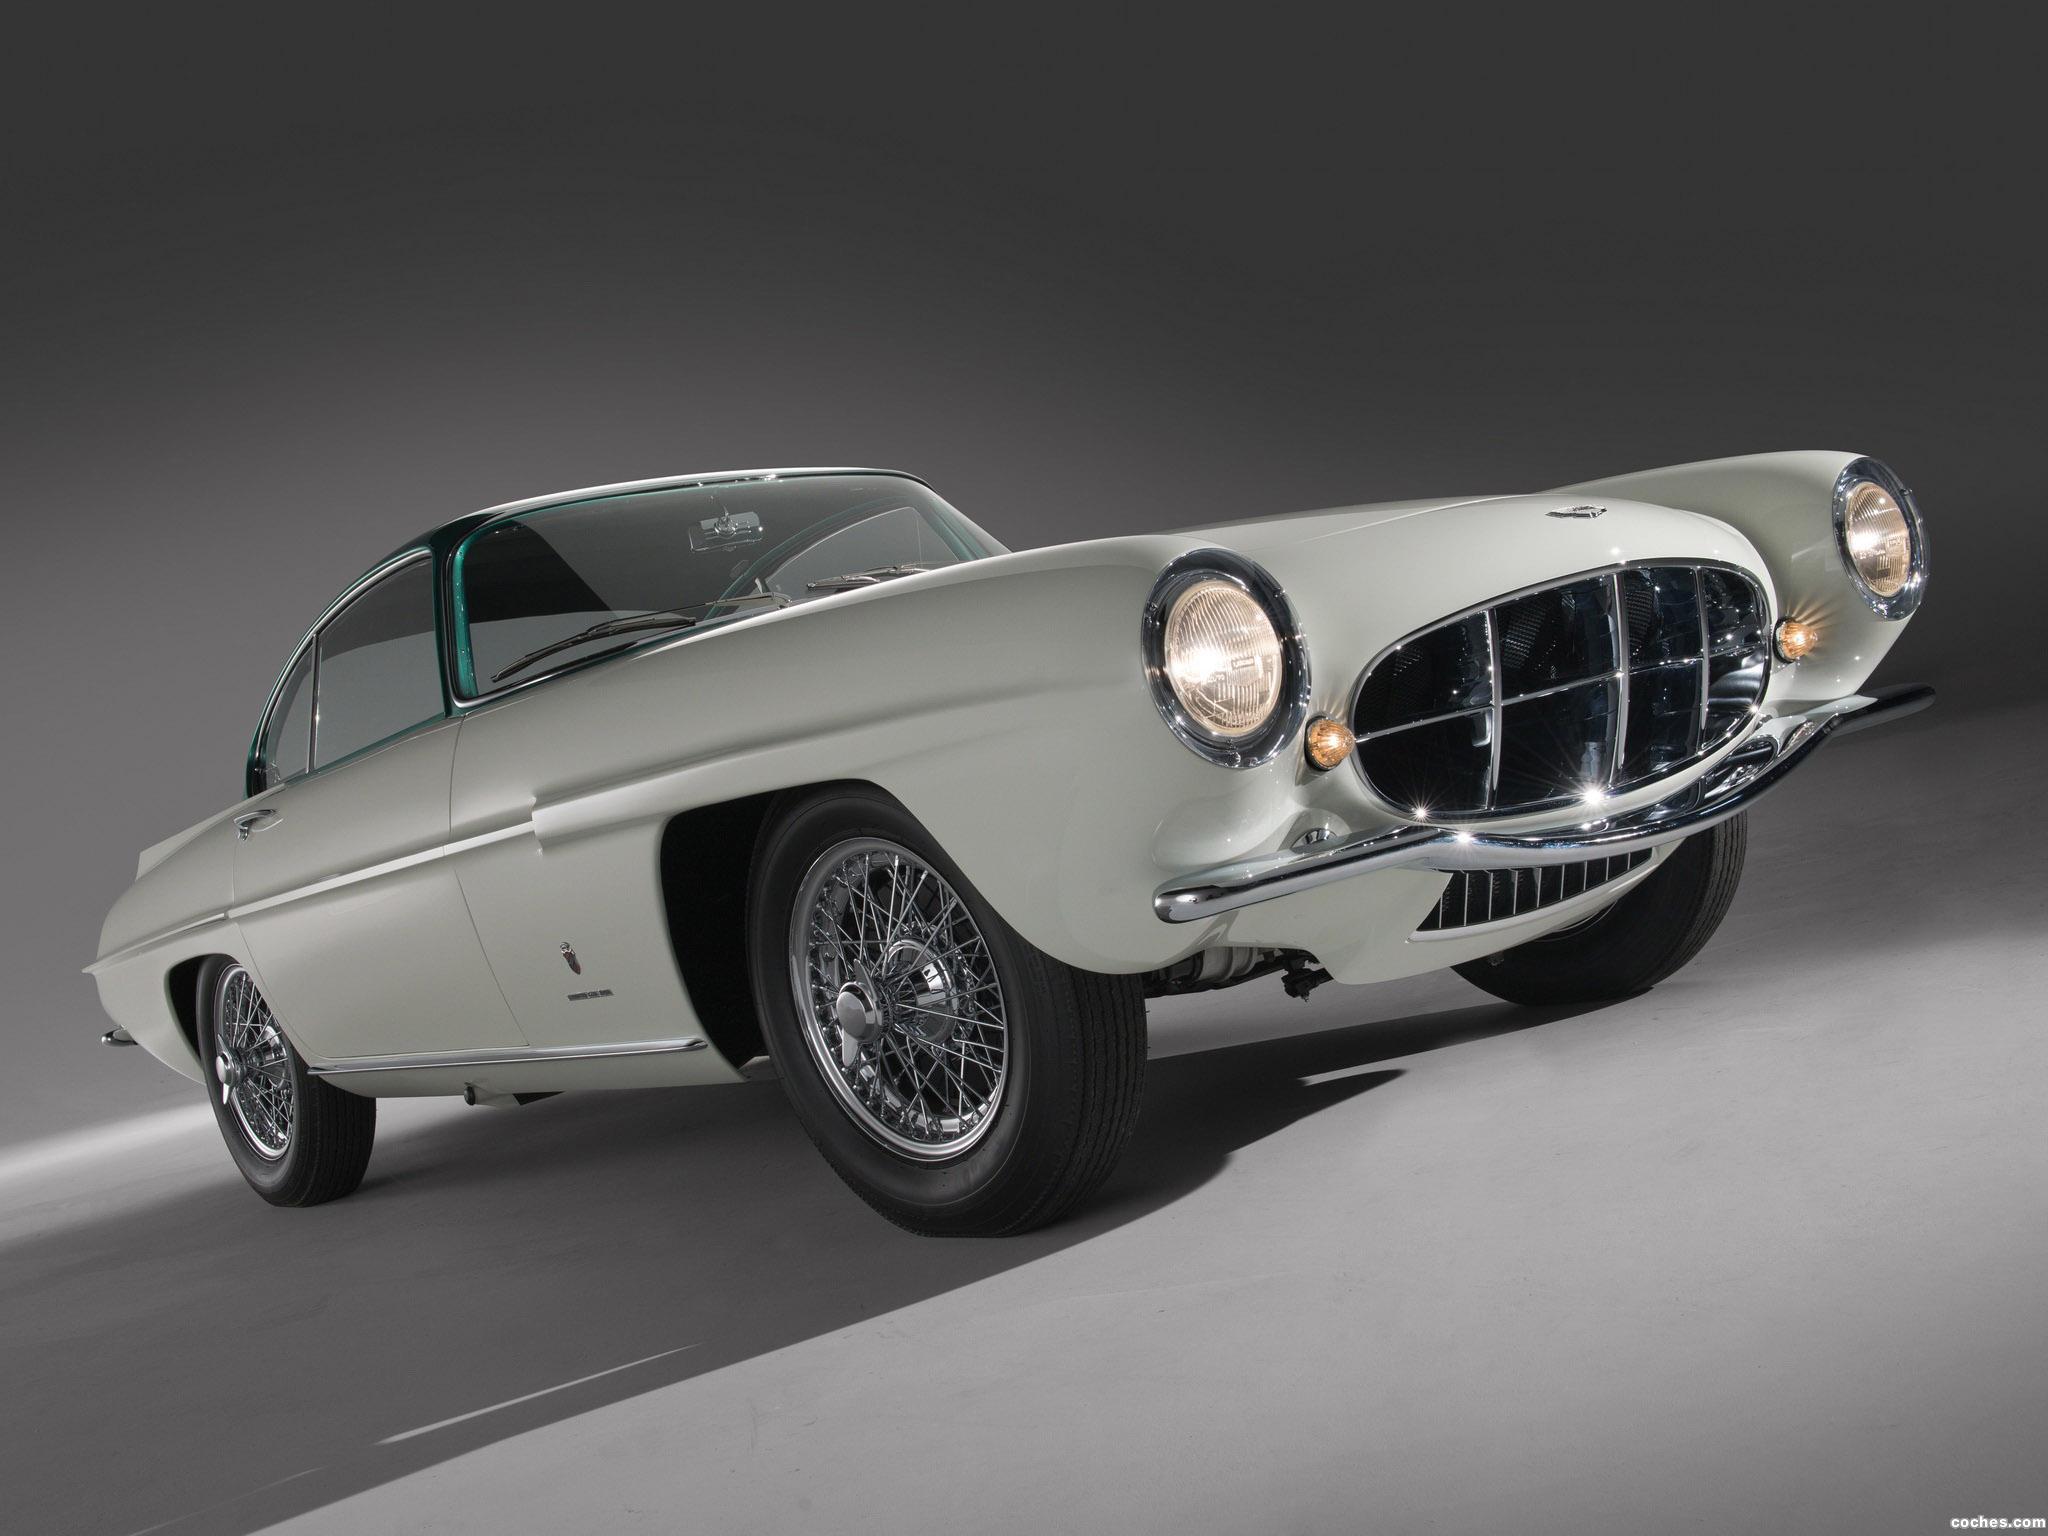 astonmartin_db2-4-supersonic-coupe-1956_r9